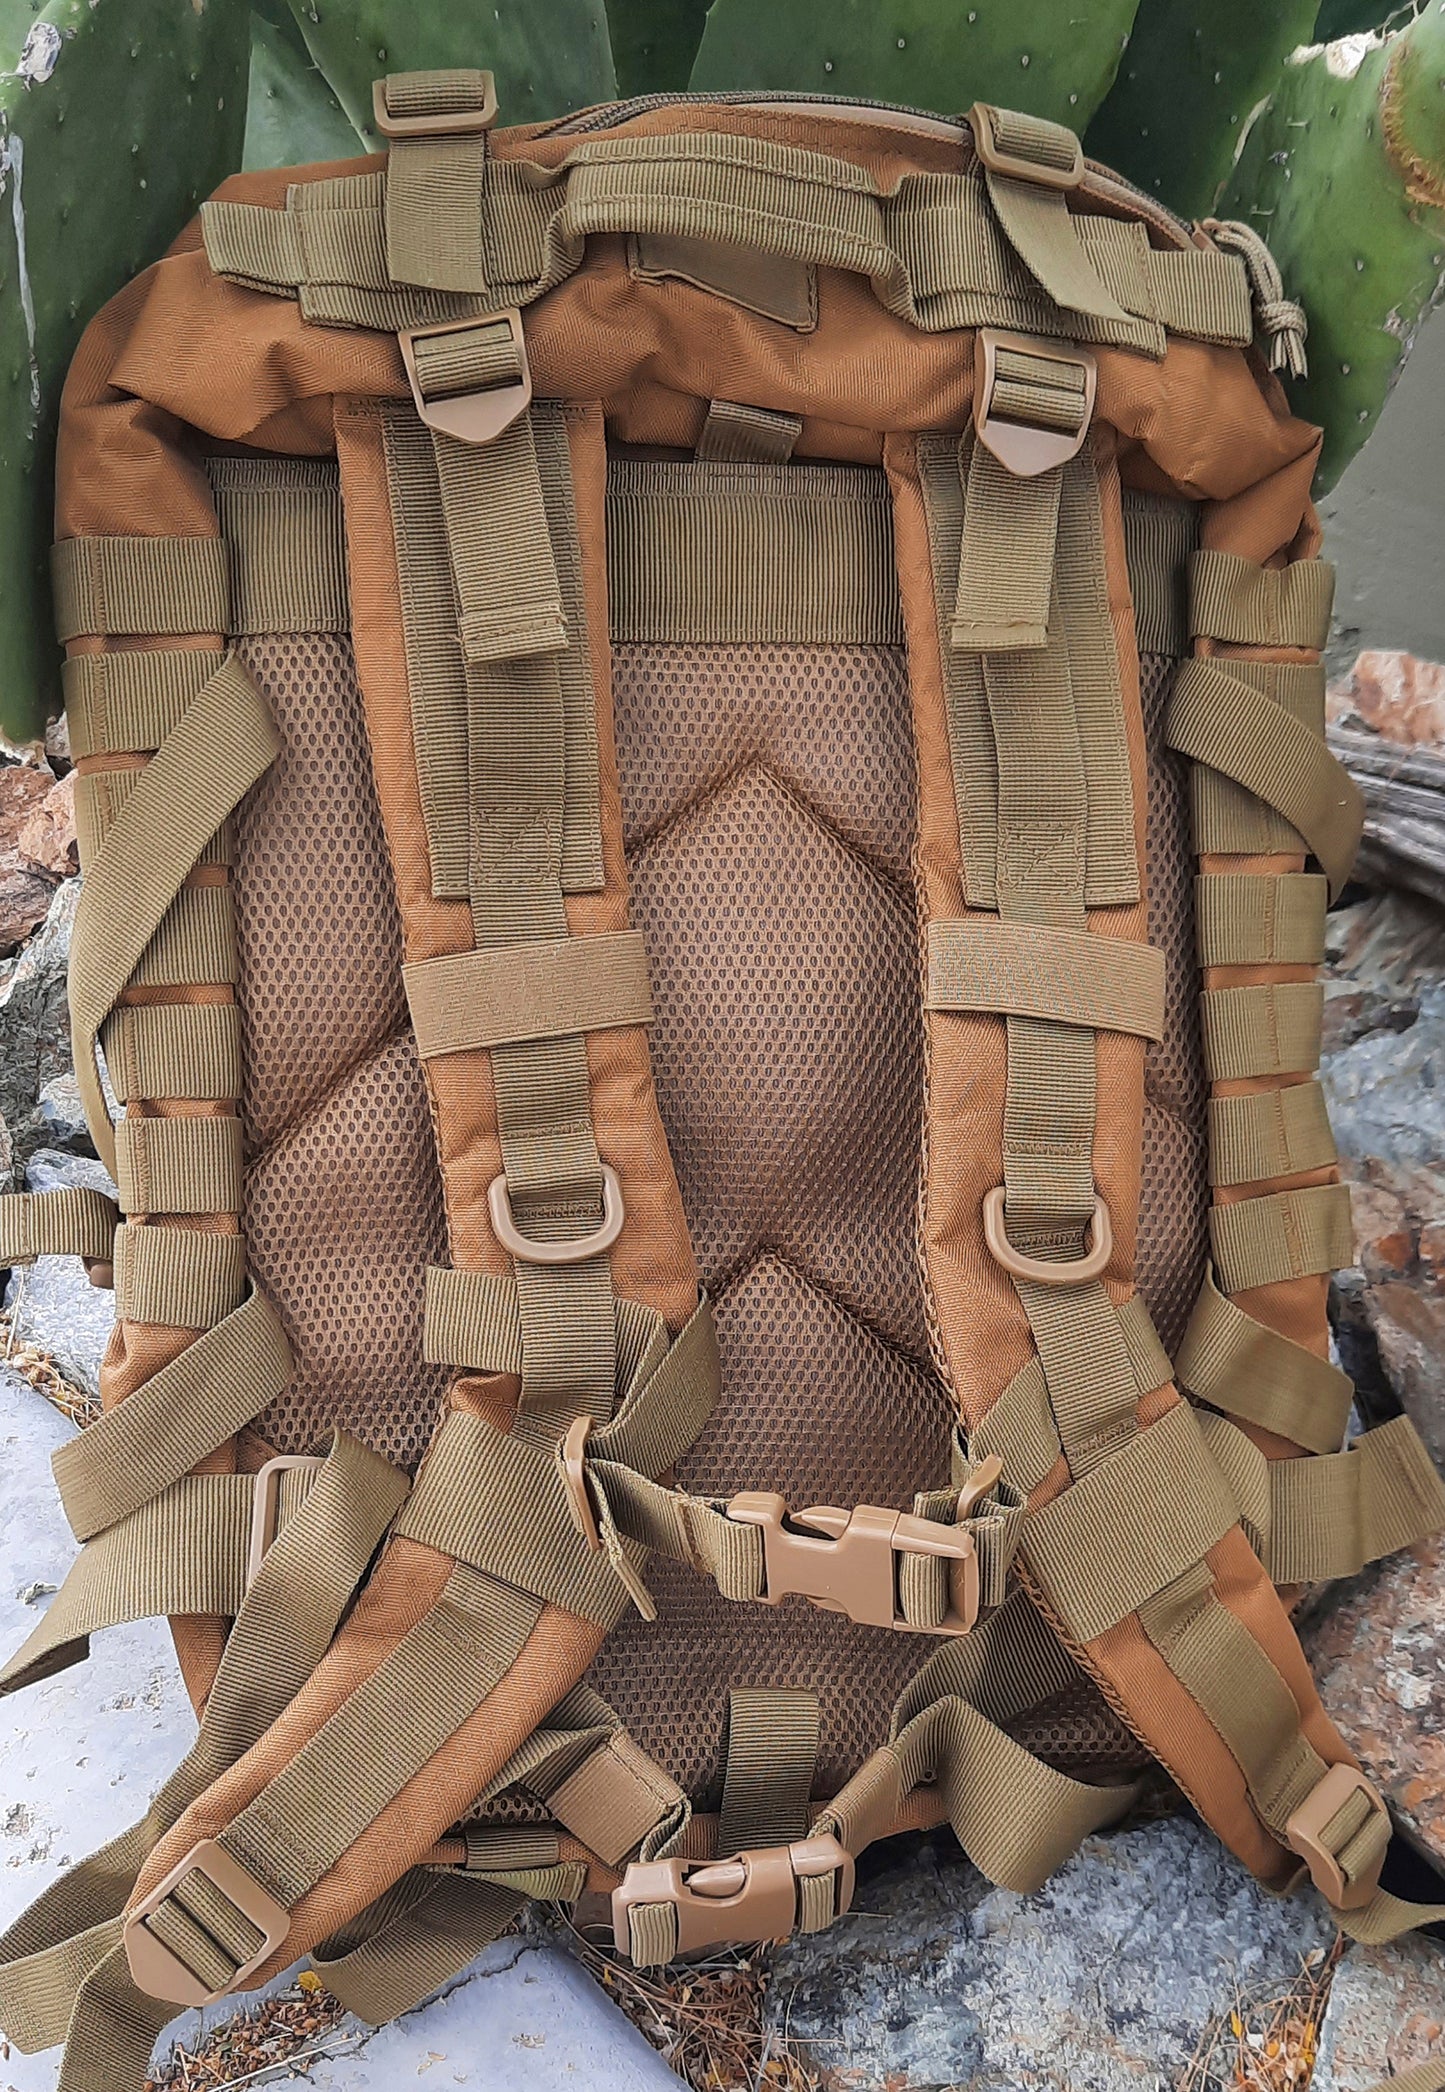 Rear view of ArmedAF® tactical back pack